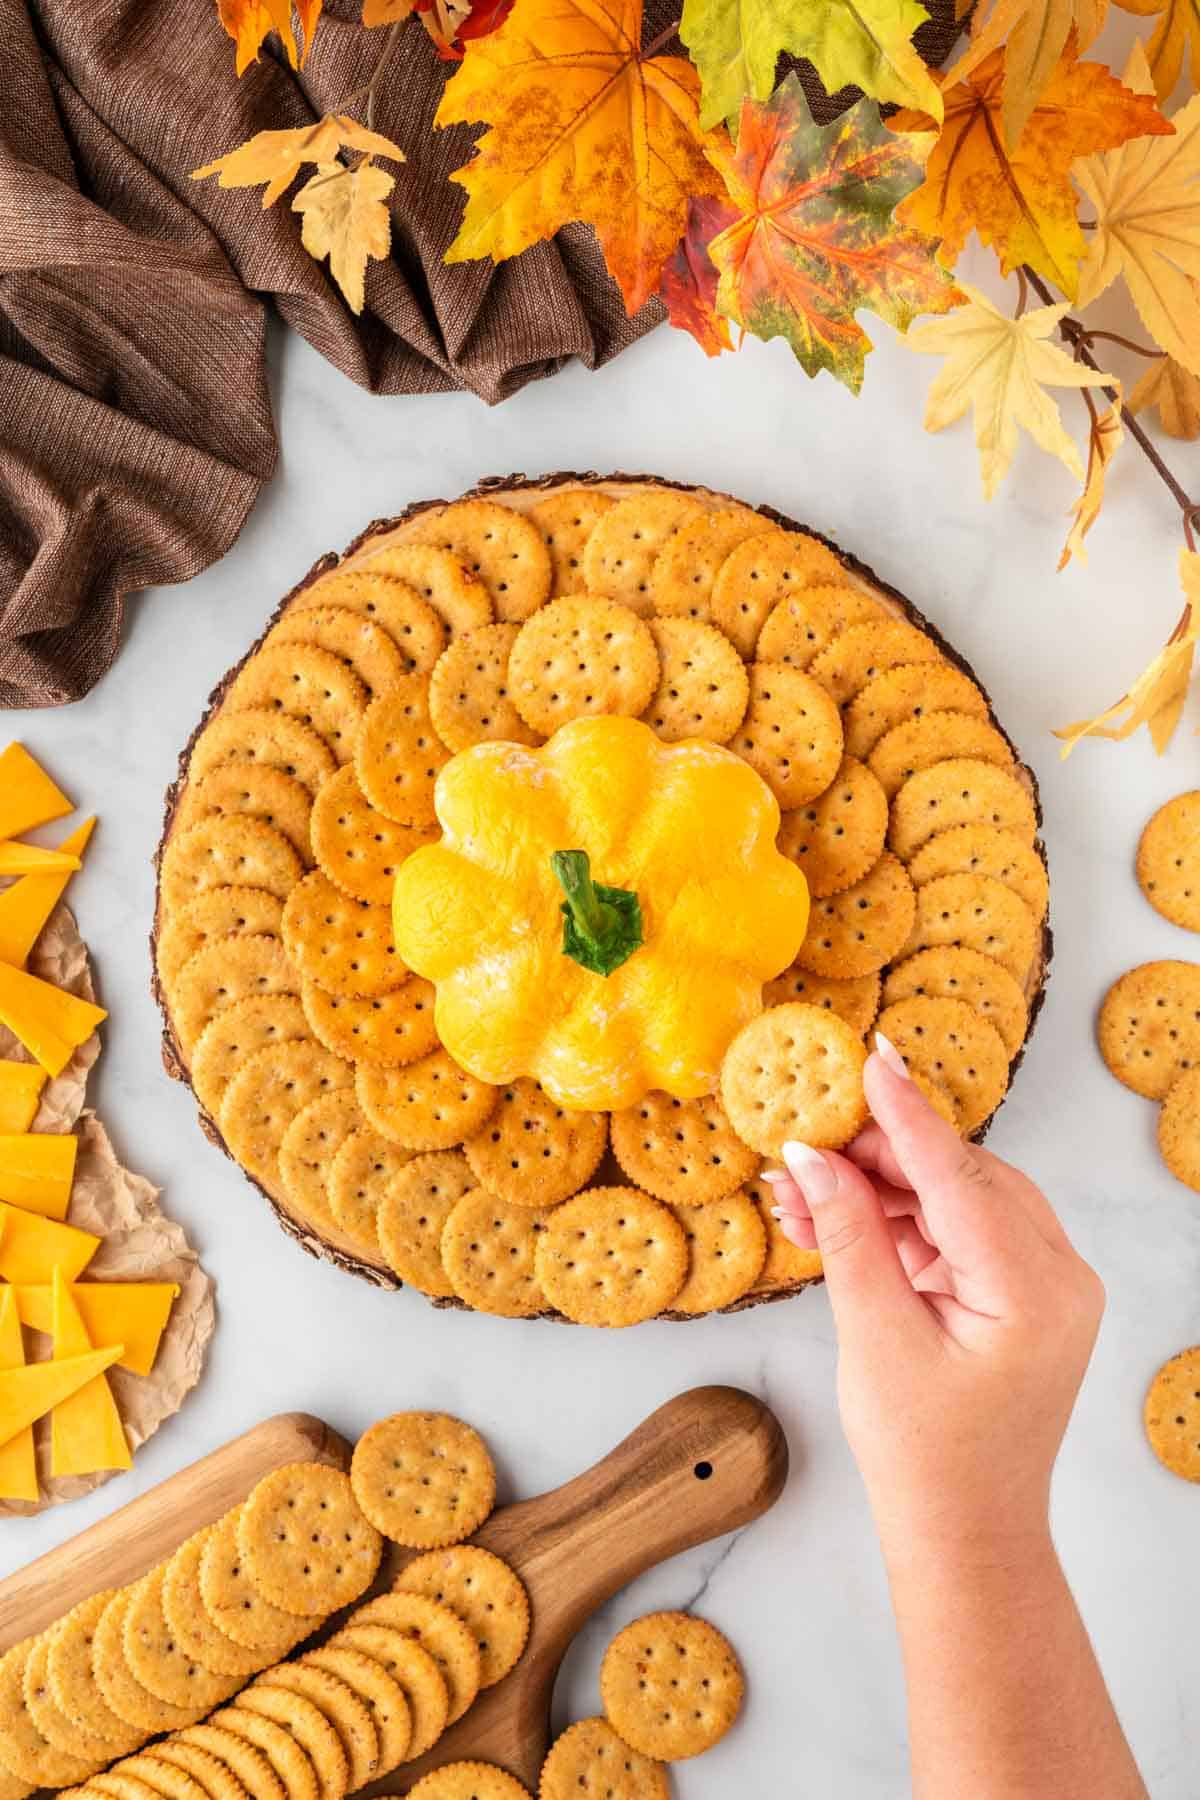 cheese ball platter with crackers for dipping